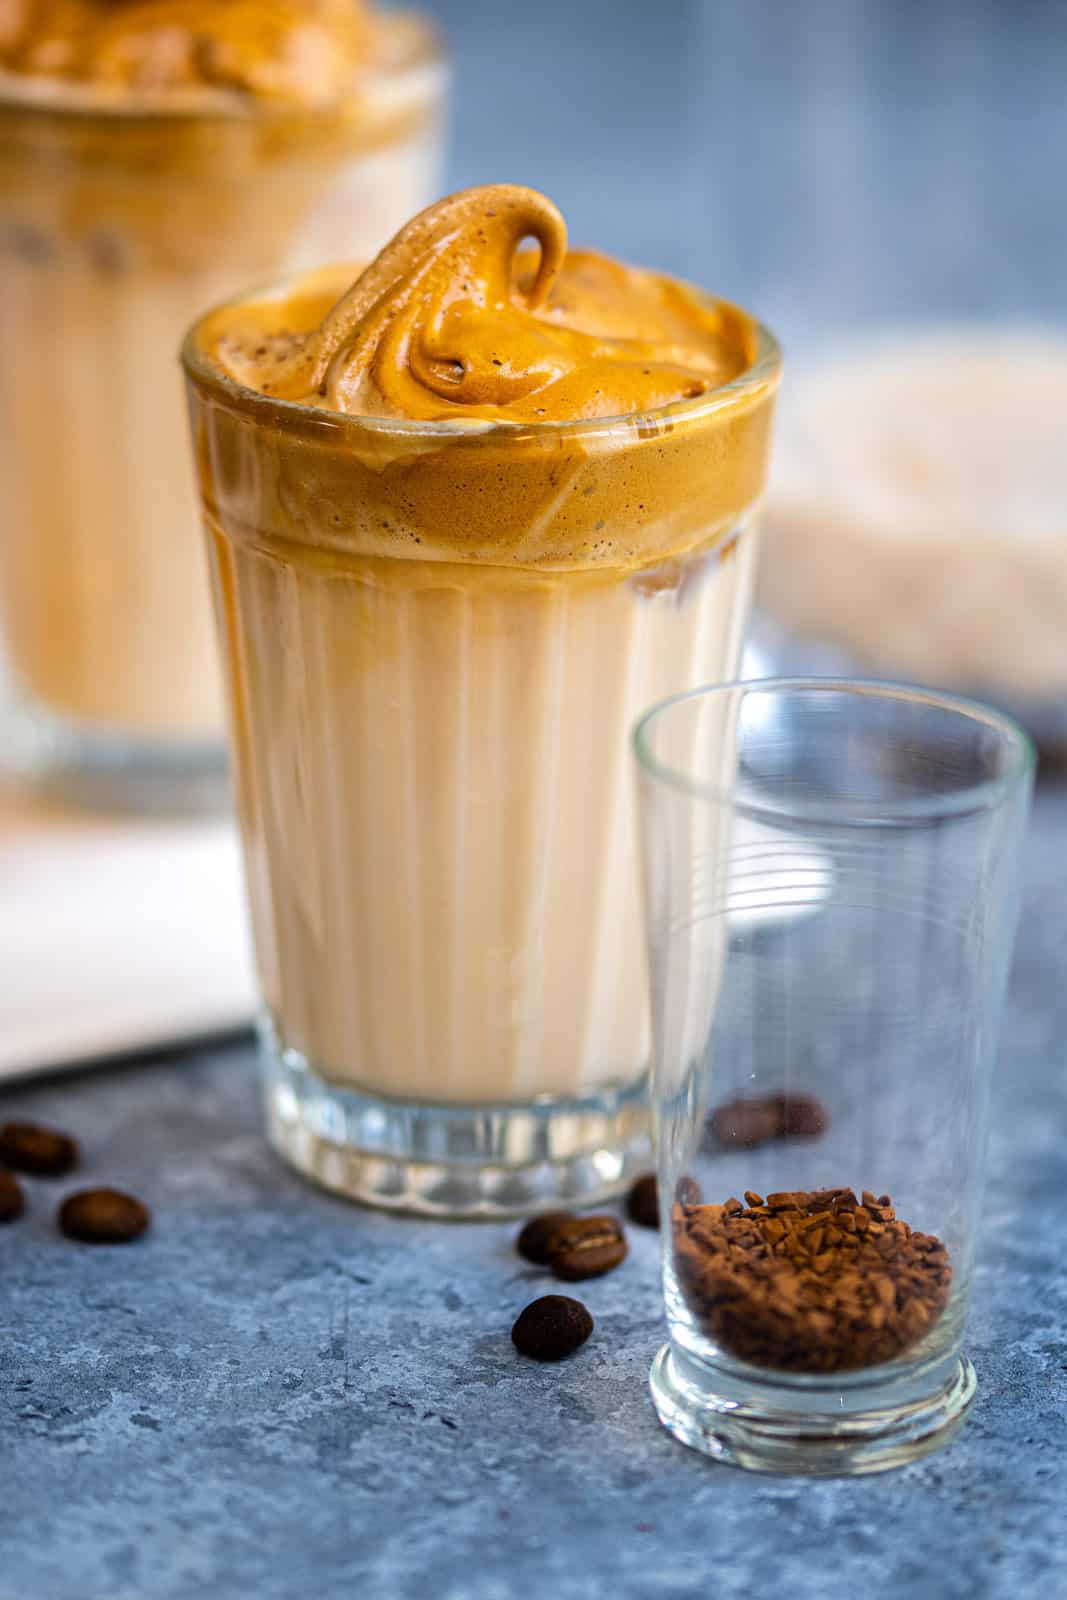 Whipped coffee served over iced milk in a short glass